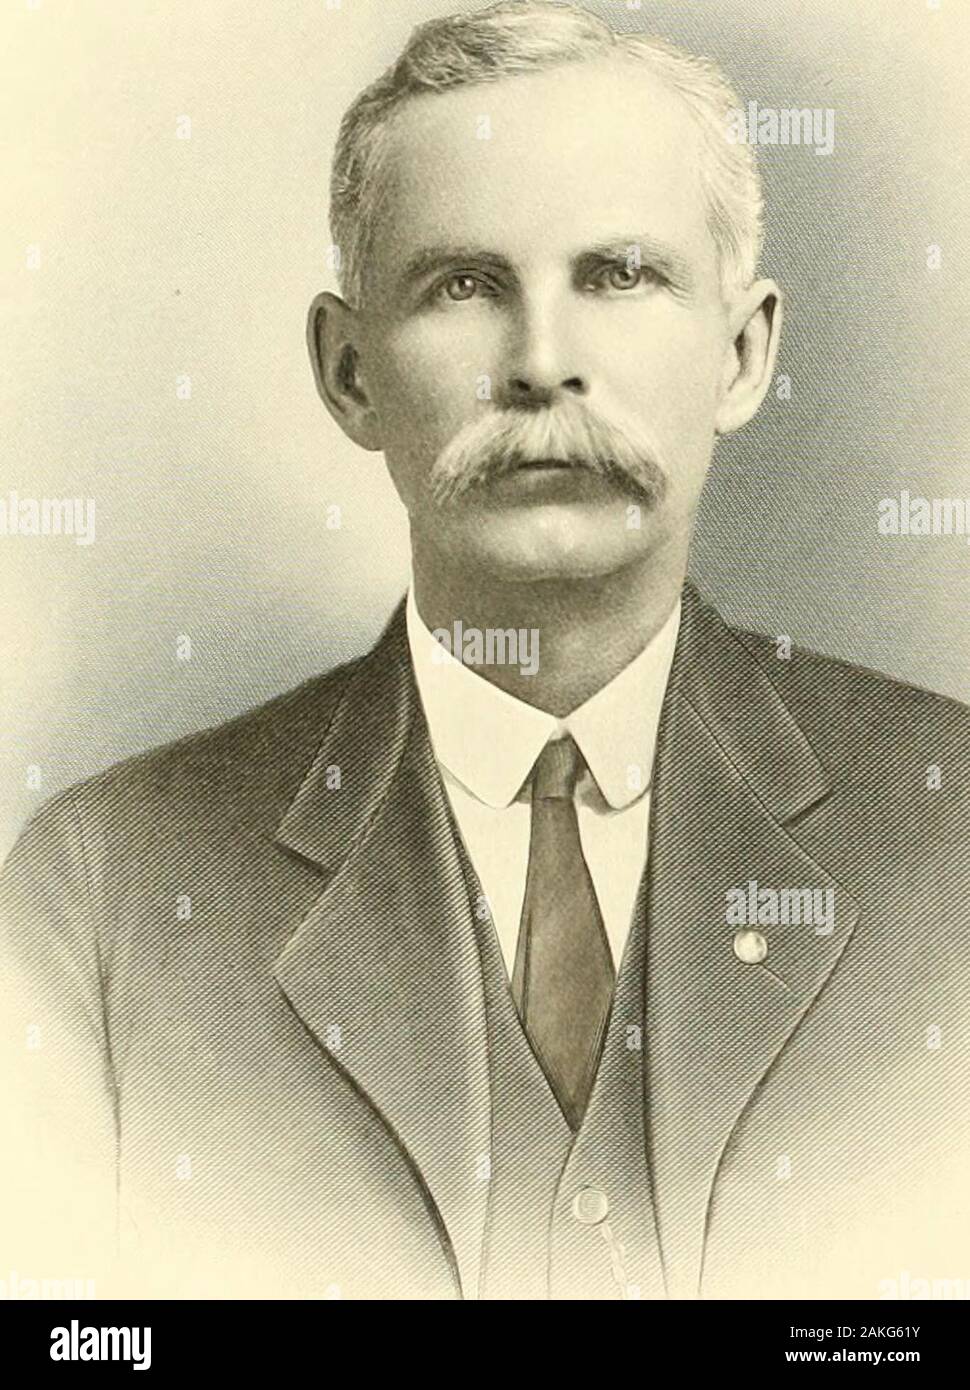 History of Idaho; a narrative account of its historical progress, its people and its principal interests . f tlie leading businessmen of Emmett, Idaho, was born in Otoe county.Nebraska, on November 20, 1871, and is the son ofW. B. and Catherine (Hughes) Hargus, natives ofIndiana and Pennsylvania, respectively. The fathercame to Nebraska as a child with his parents in1851, his birth having occurred in 1841. He followedthe agricultural business, which was the occupationwhich his father also devoted his life to, and diedin Nebraska in 1908. The mother passed away in1898, ten years before the demi Stock Photo